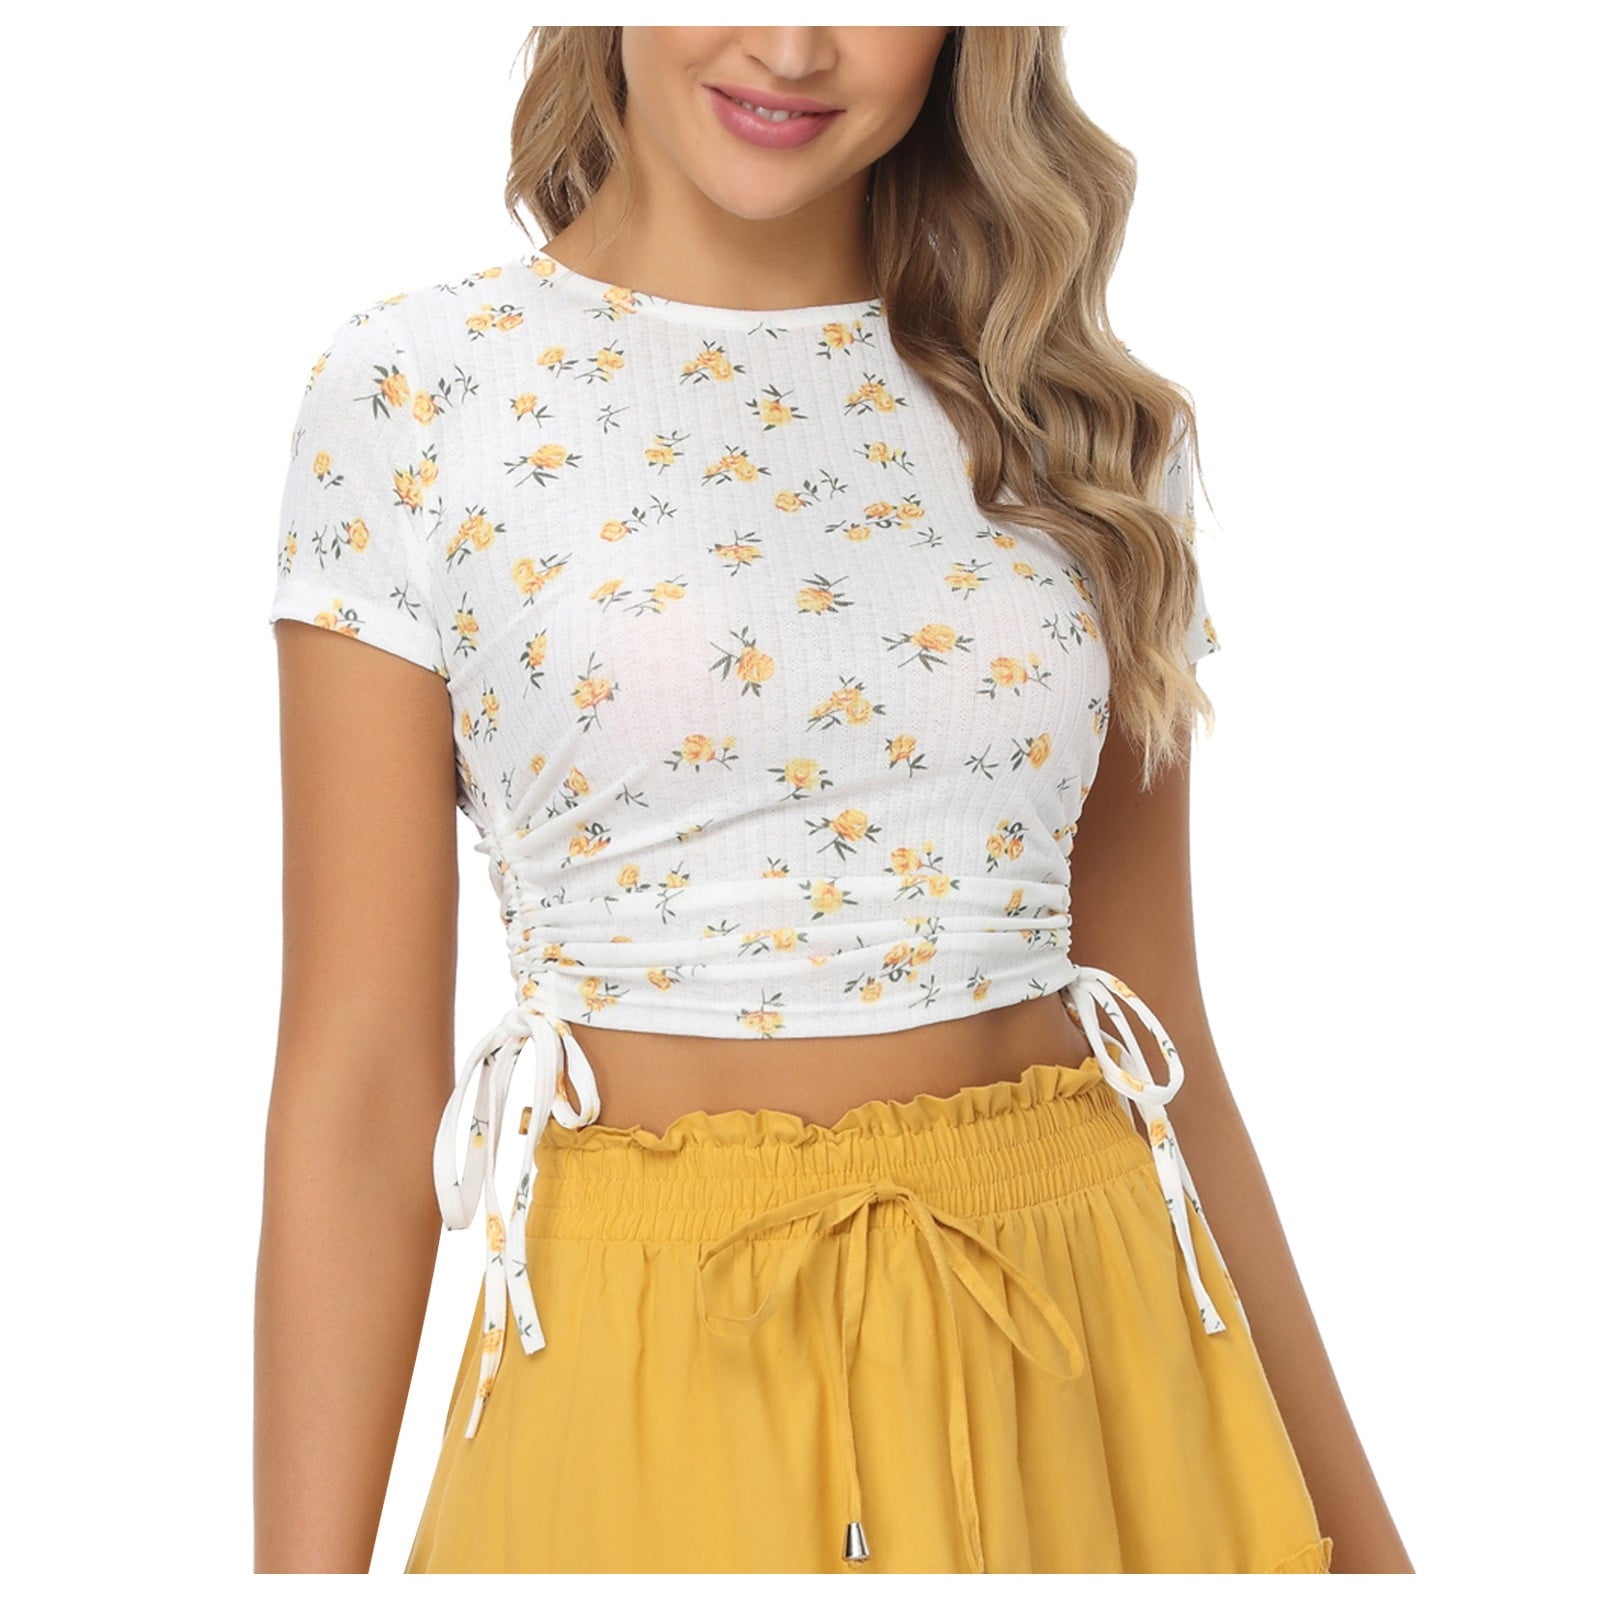 Women's Slim Fitting Side Tie up Crinched Crop Tops Clearance